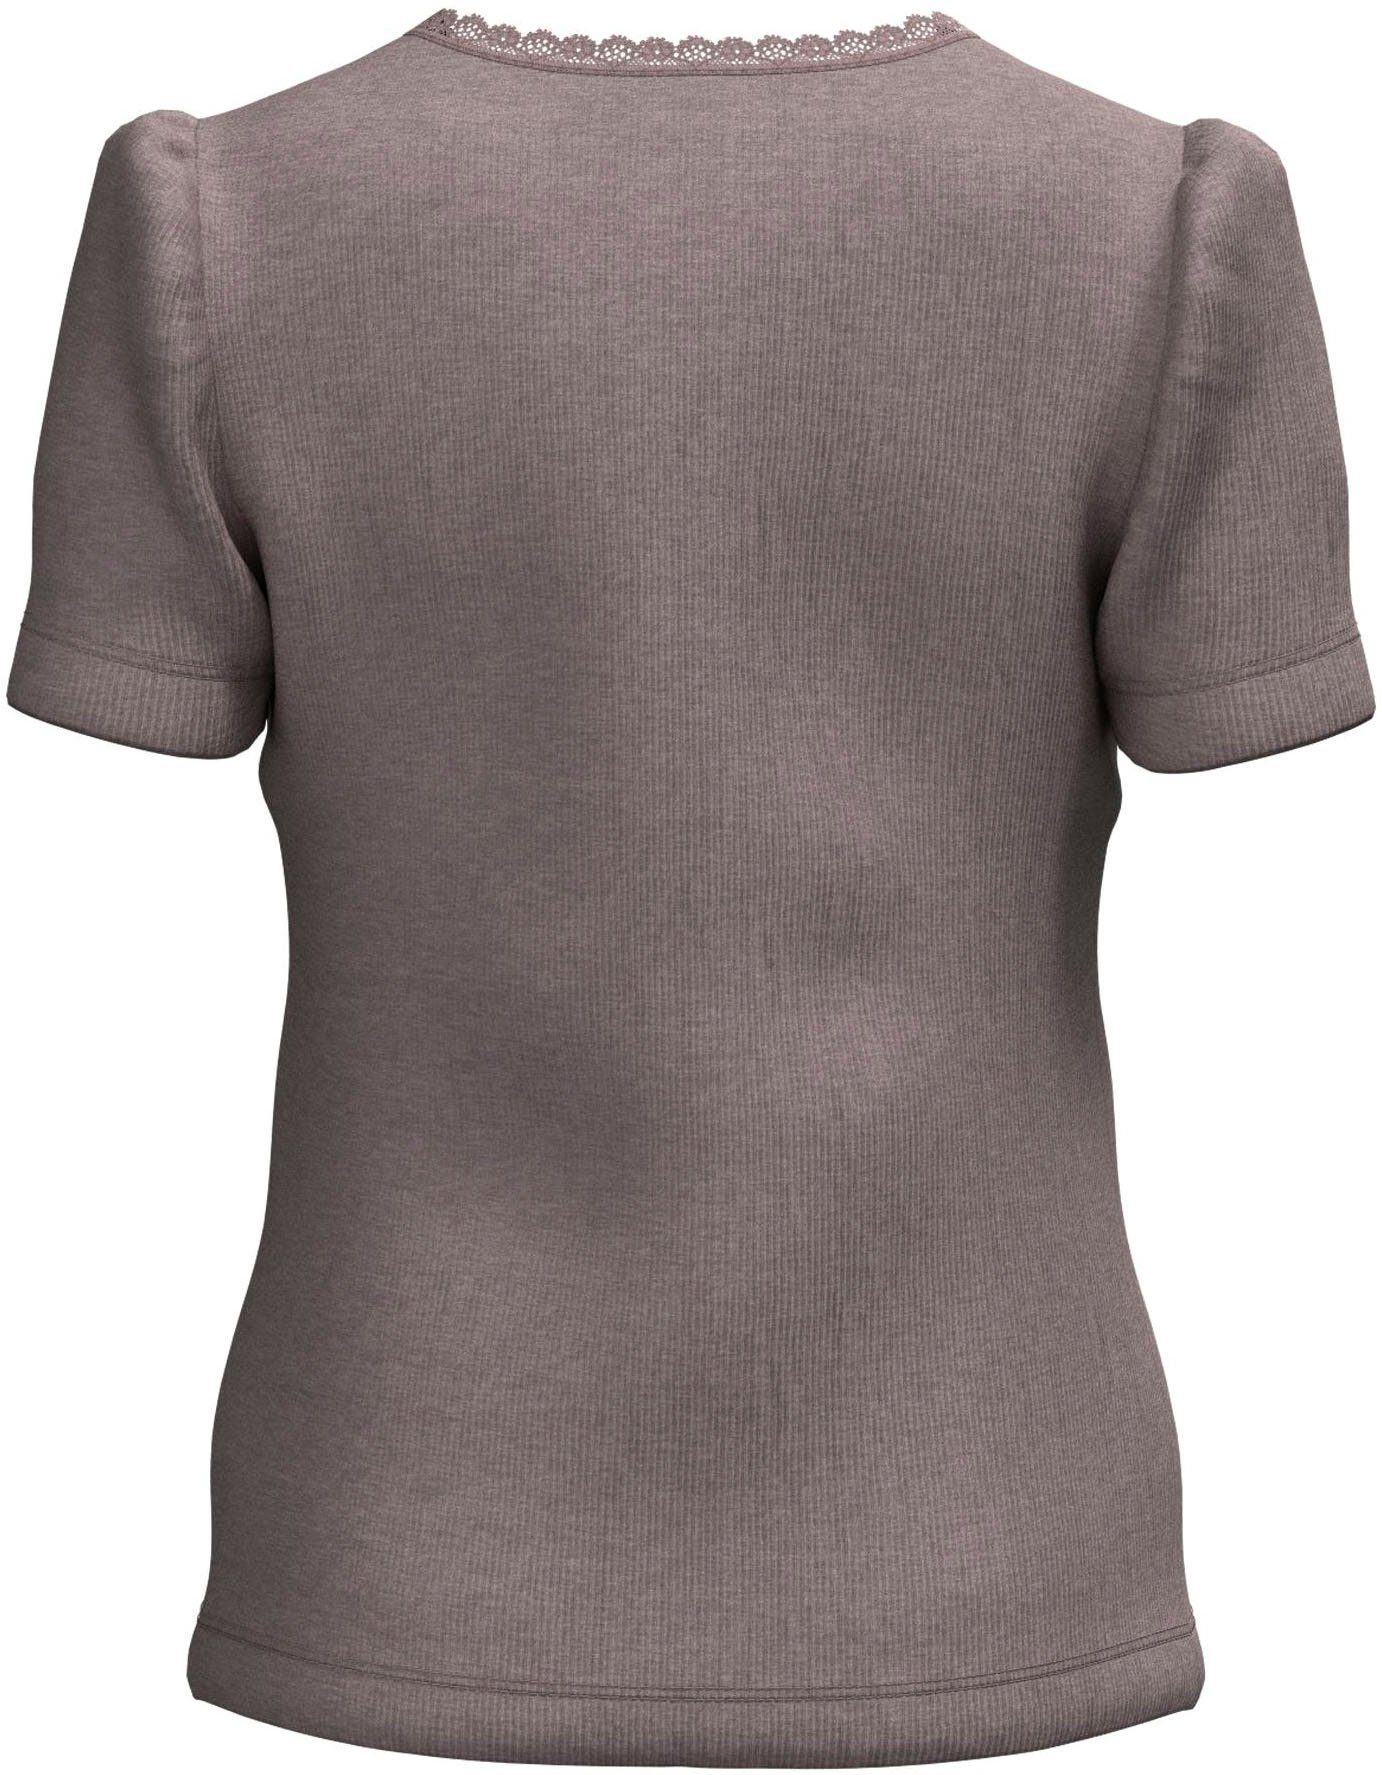 Name It NMFKAB NOOS deauville TOP Shirttop SS mauve